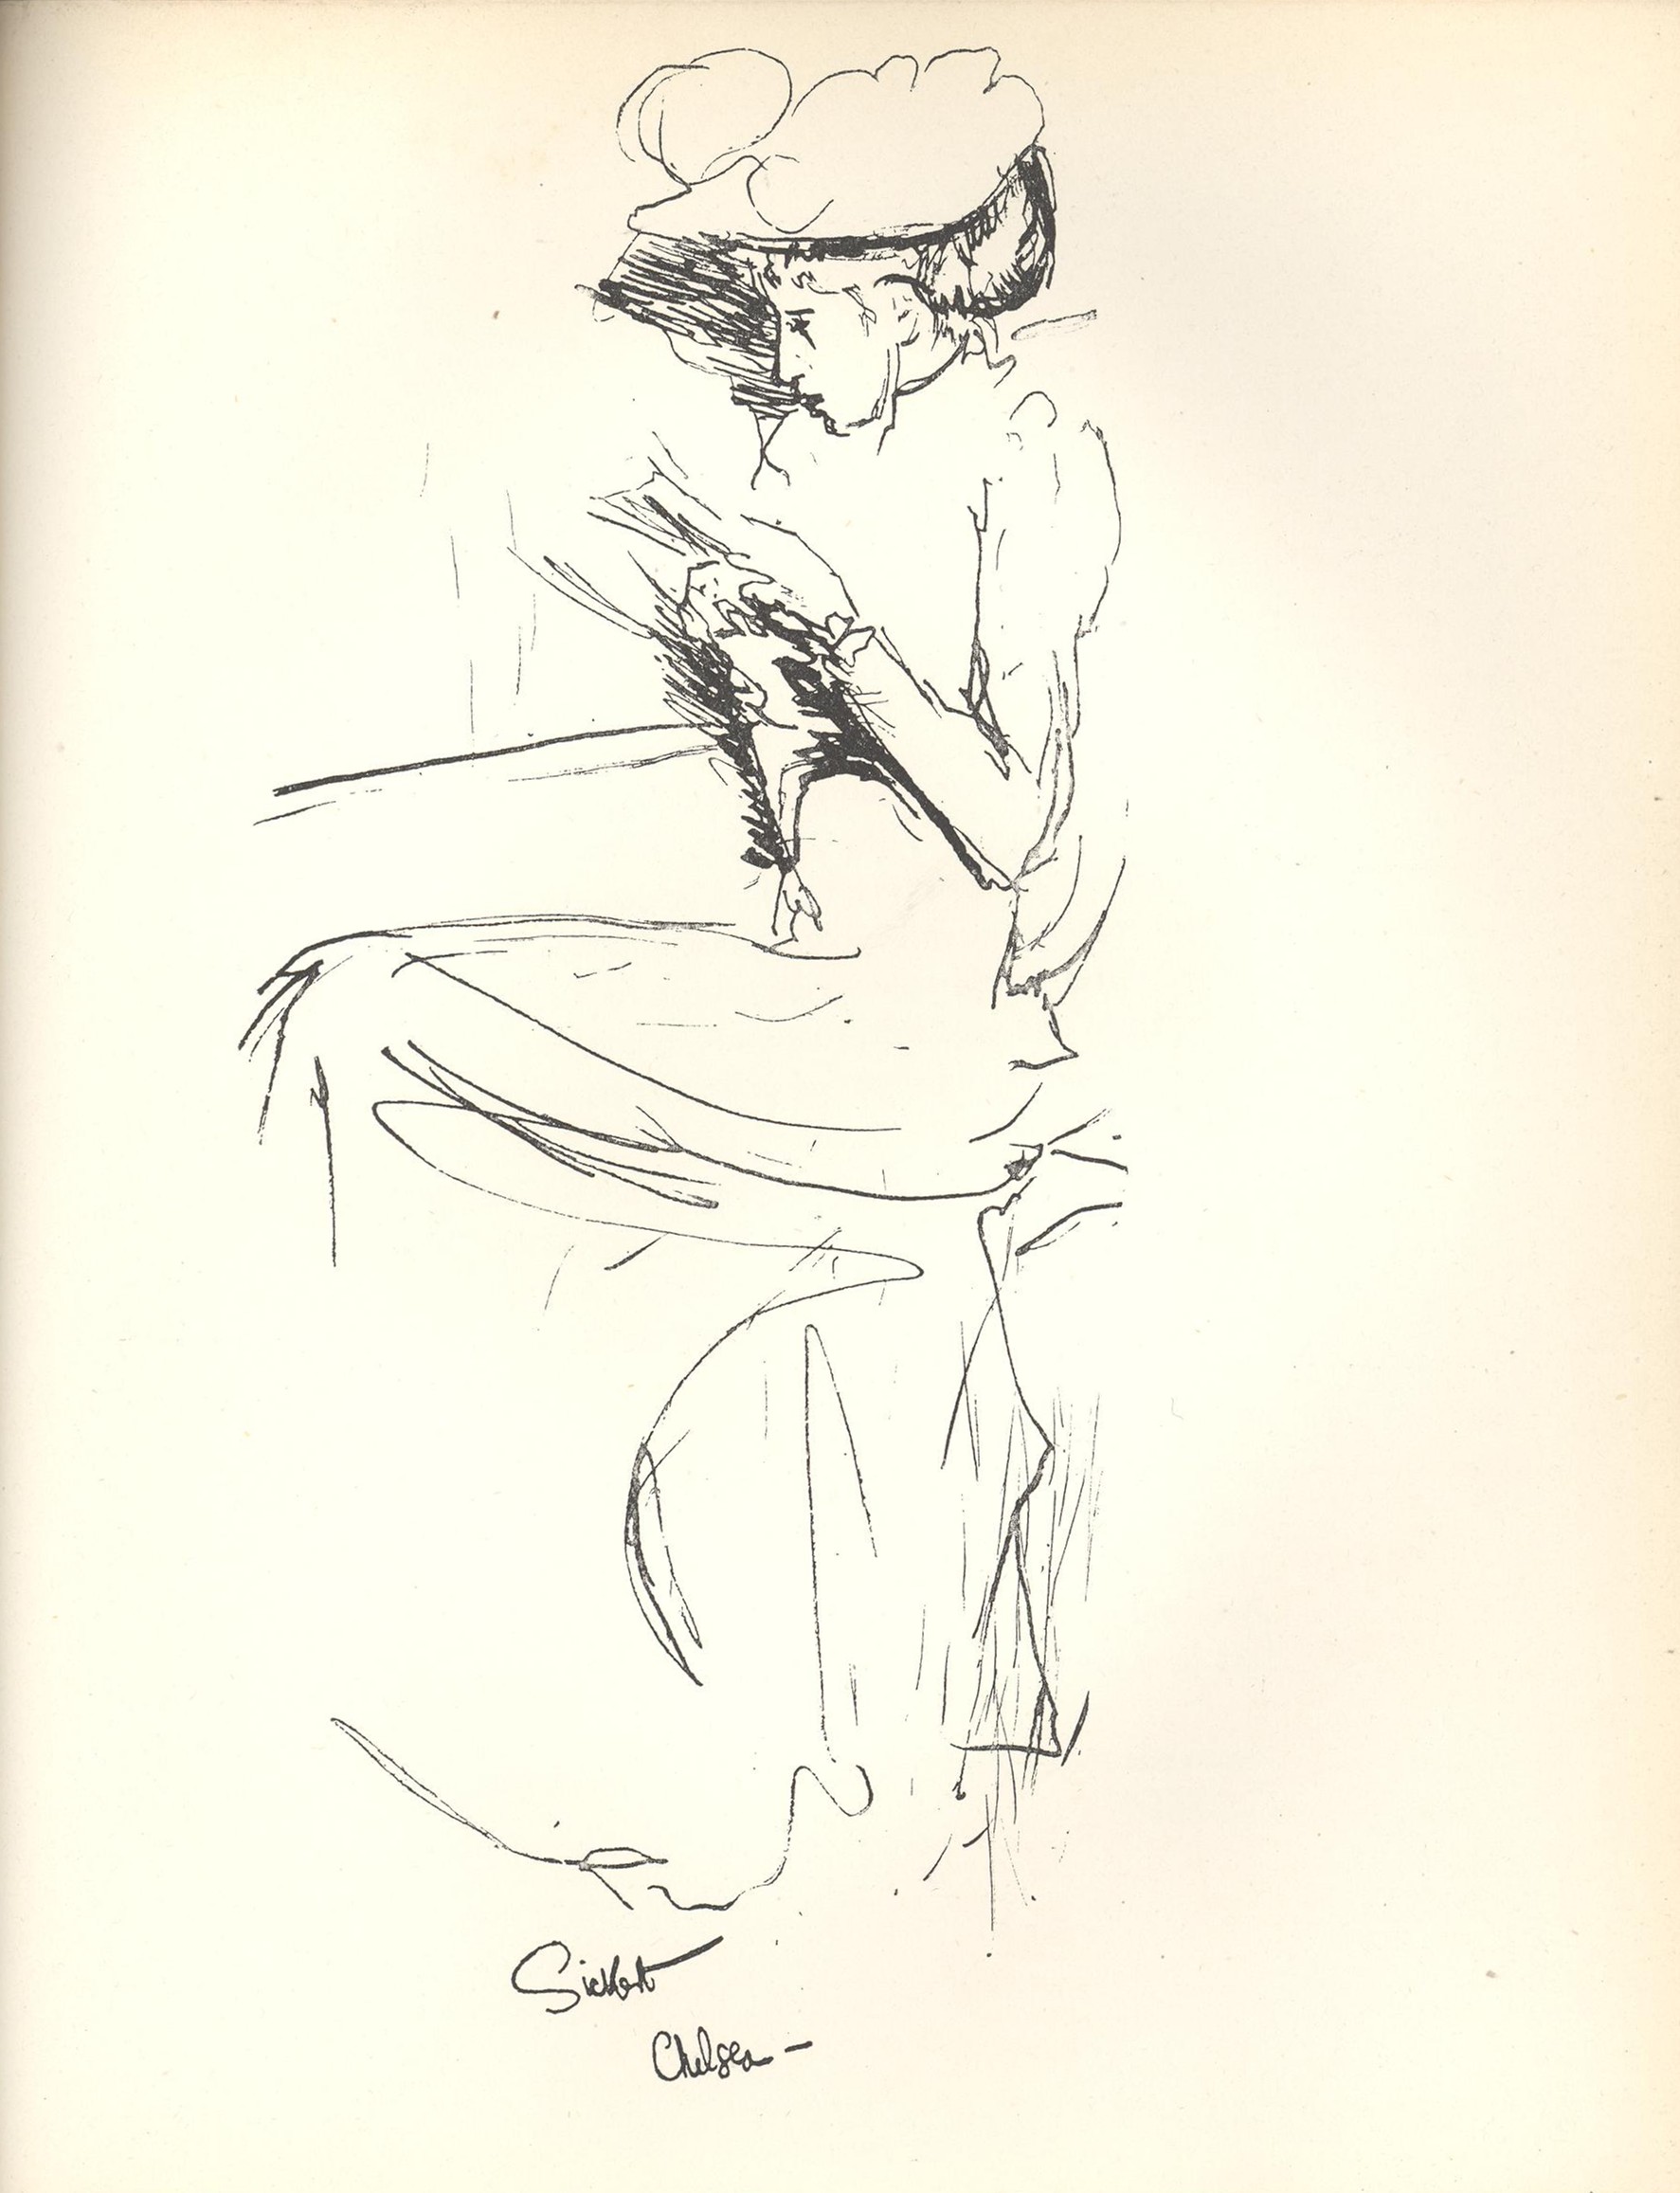 Image is of a young woman sitting in profile on a chair or the bench of a railway carriage reading She is wearing a large hat and a white dress Her body extends from the bottom of the image to the top filling up 3 4s of the page The background is open and light coloured The artist s signature as well as the word Chelsea are inscribed in middle bottom of image positioned under the edge of the woman s skirt The image is vertically displayed